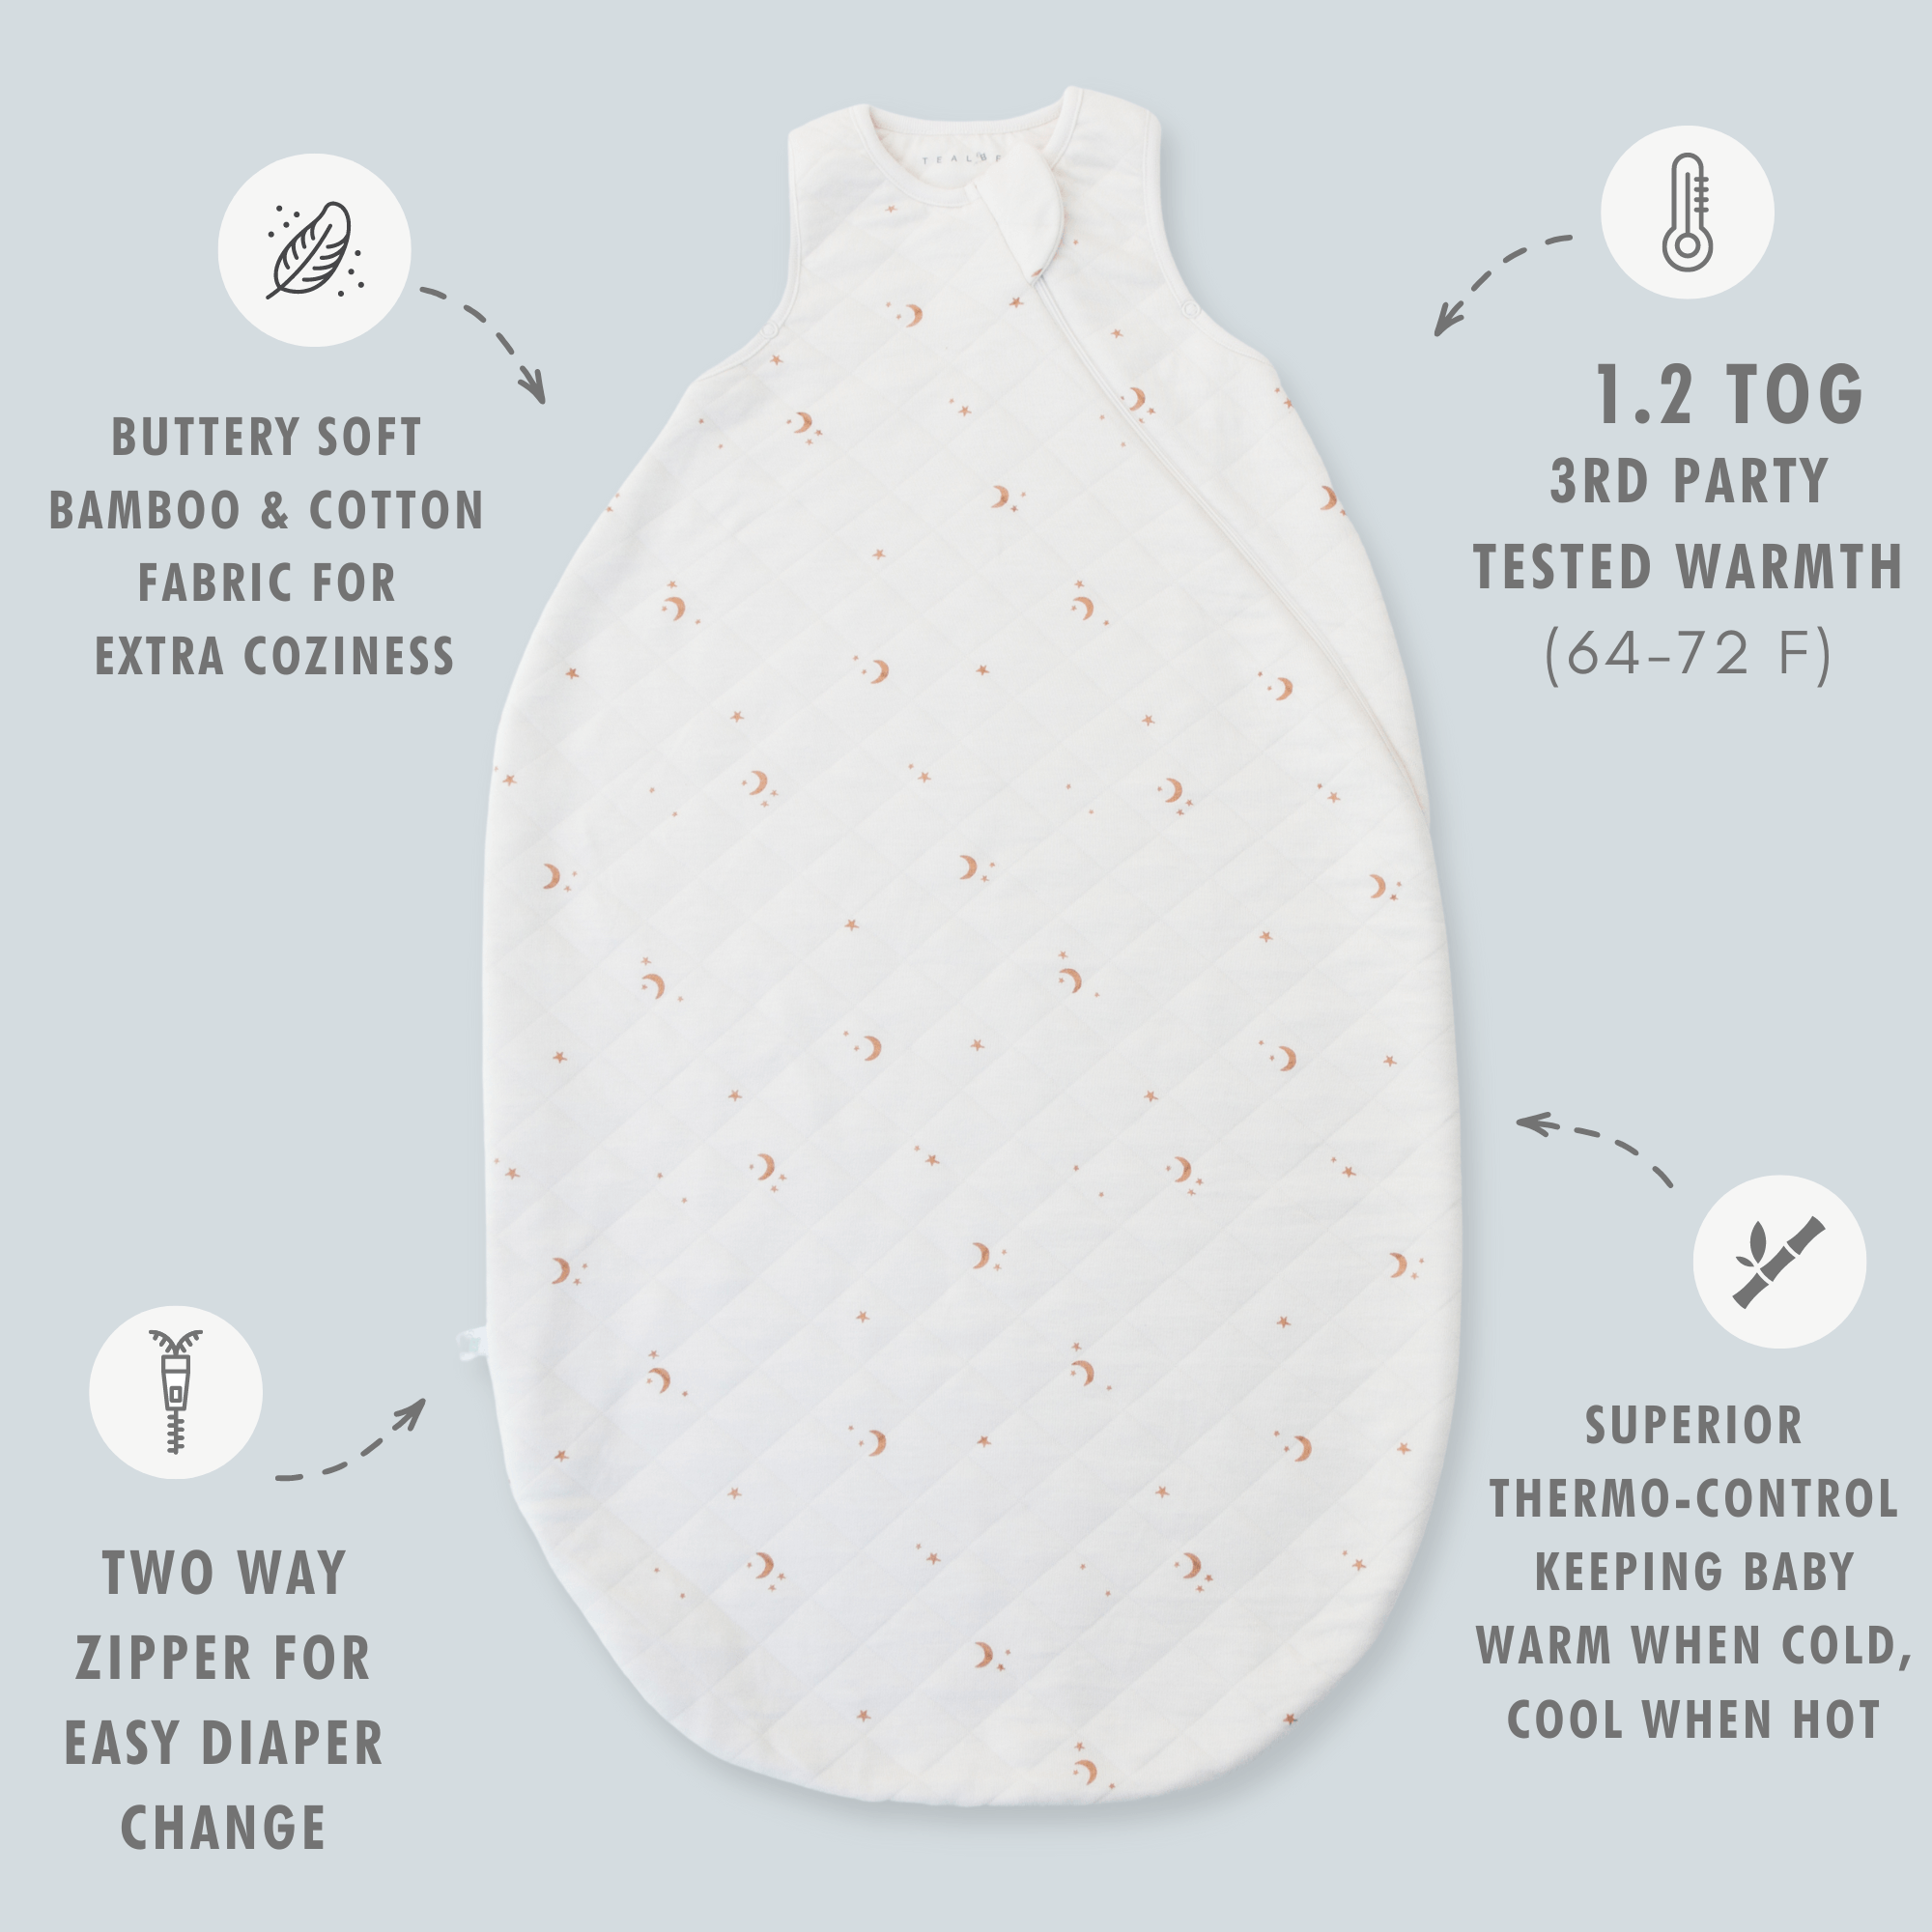 Baby Sleep Sack Tealbee Checkered Buttery Soft bamboo & cotton fabric for extra coziness, 1.2 TOG Third Party Tested Warmth (64-72 F), Two way zipper for easy diaper change, Superior thermo-control keeping baby warm when cold, cool when hot